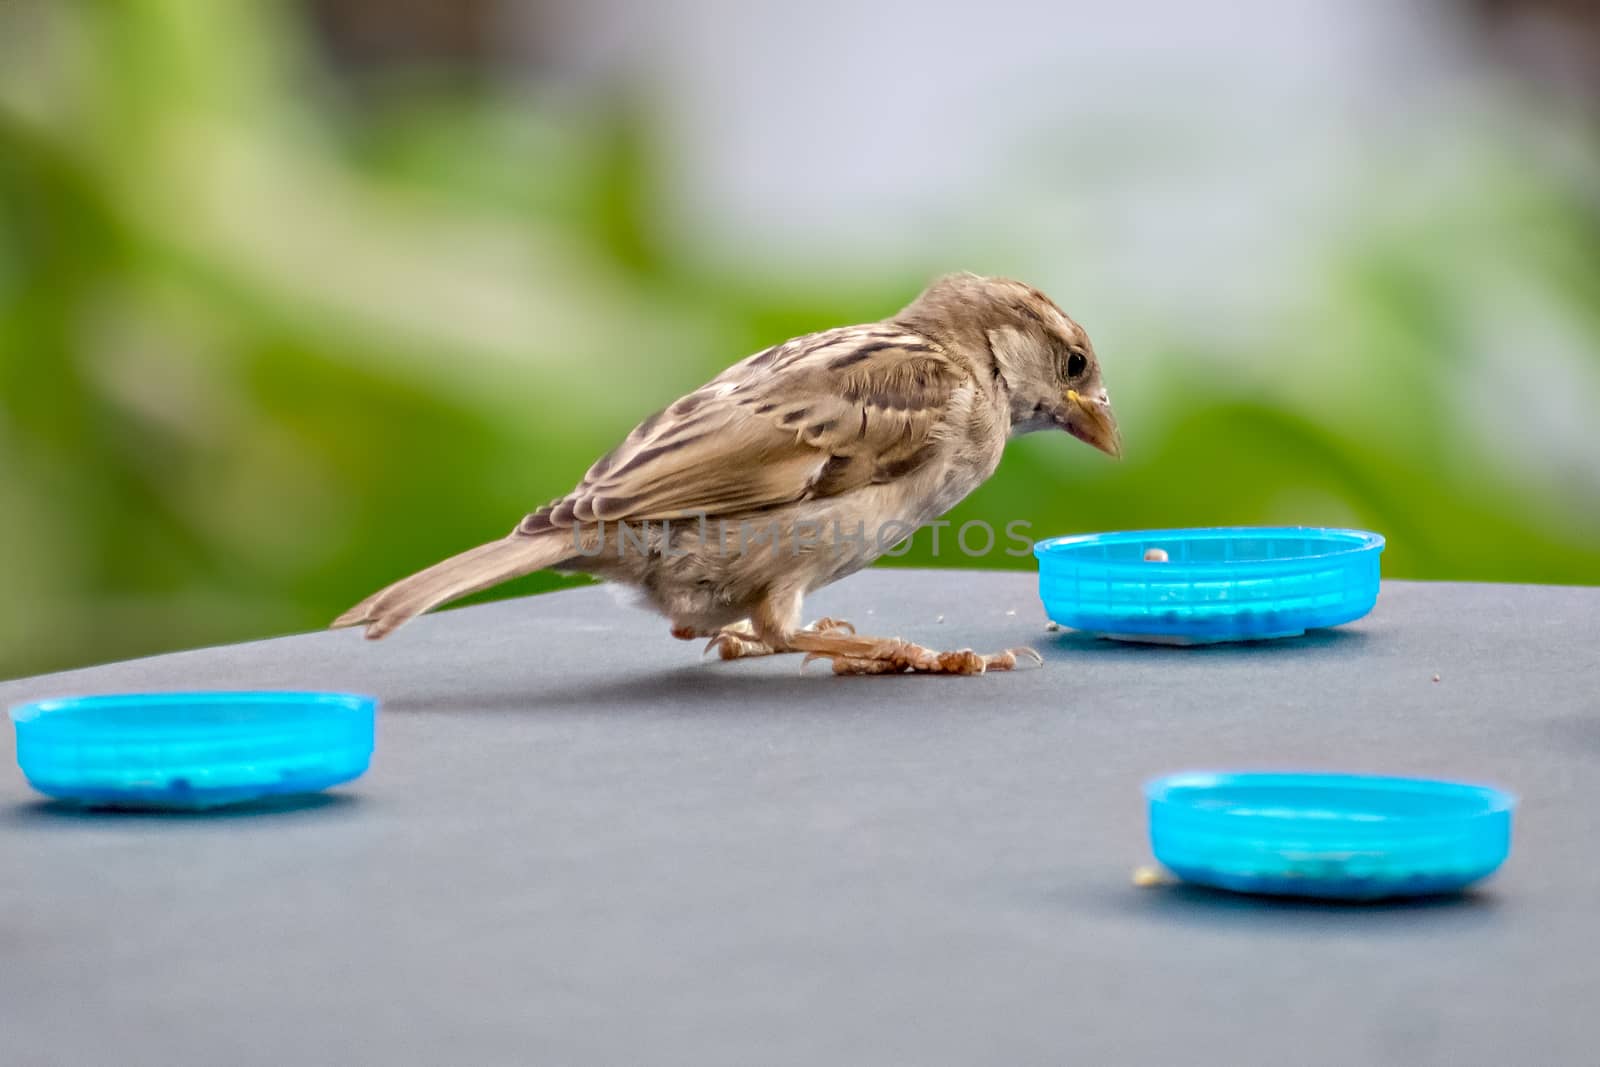 Selective focus, shallow depth of field, isolated image of a female sparrow on wall eating food with clear green background.